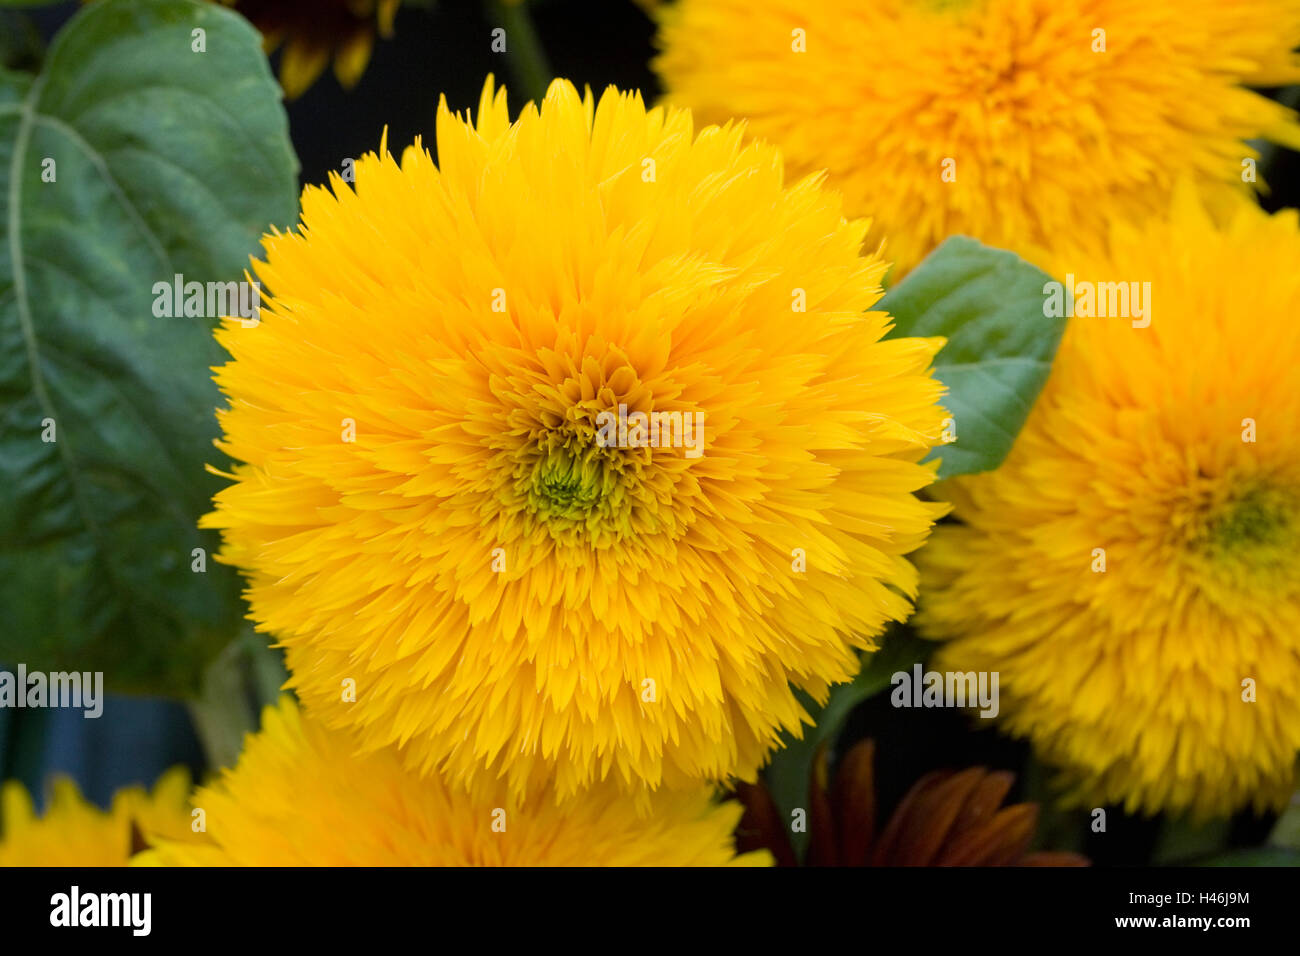 Helianthus annuus 'Teddy Bear'. Sunflowers being used as a cut flower. Stock Photo